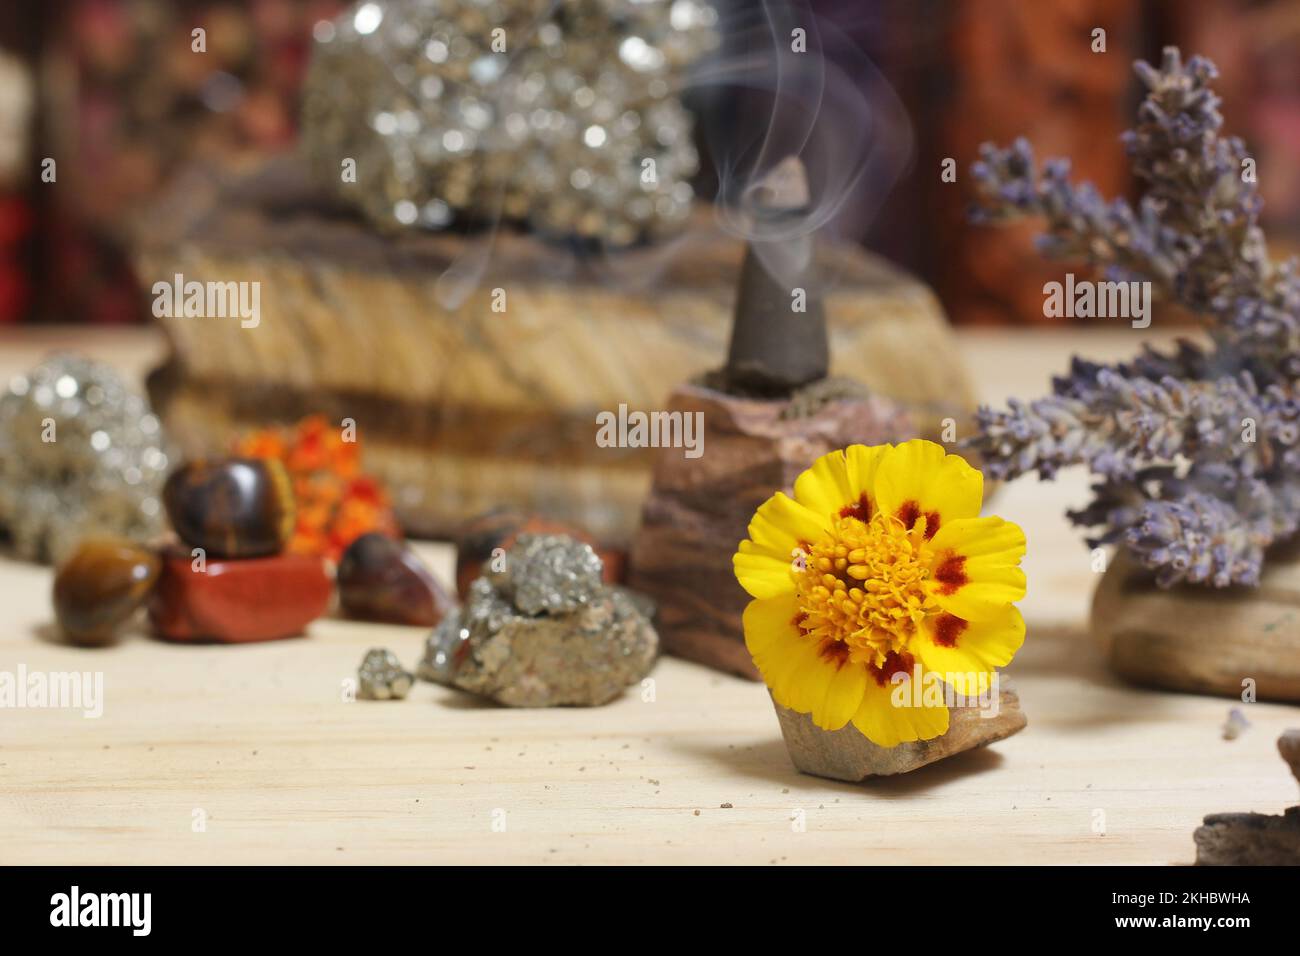 Incense Cone on Stone With Crystals and Flowers. Meditation Altar Stock Photo